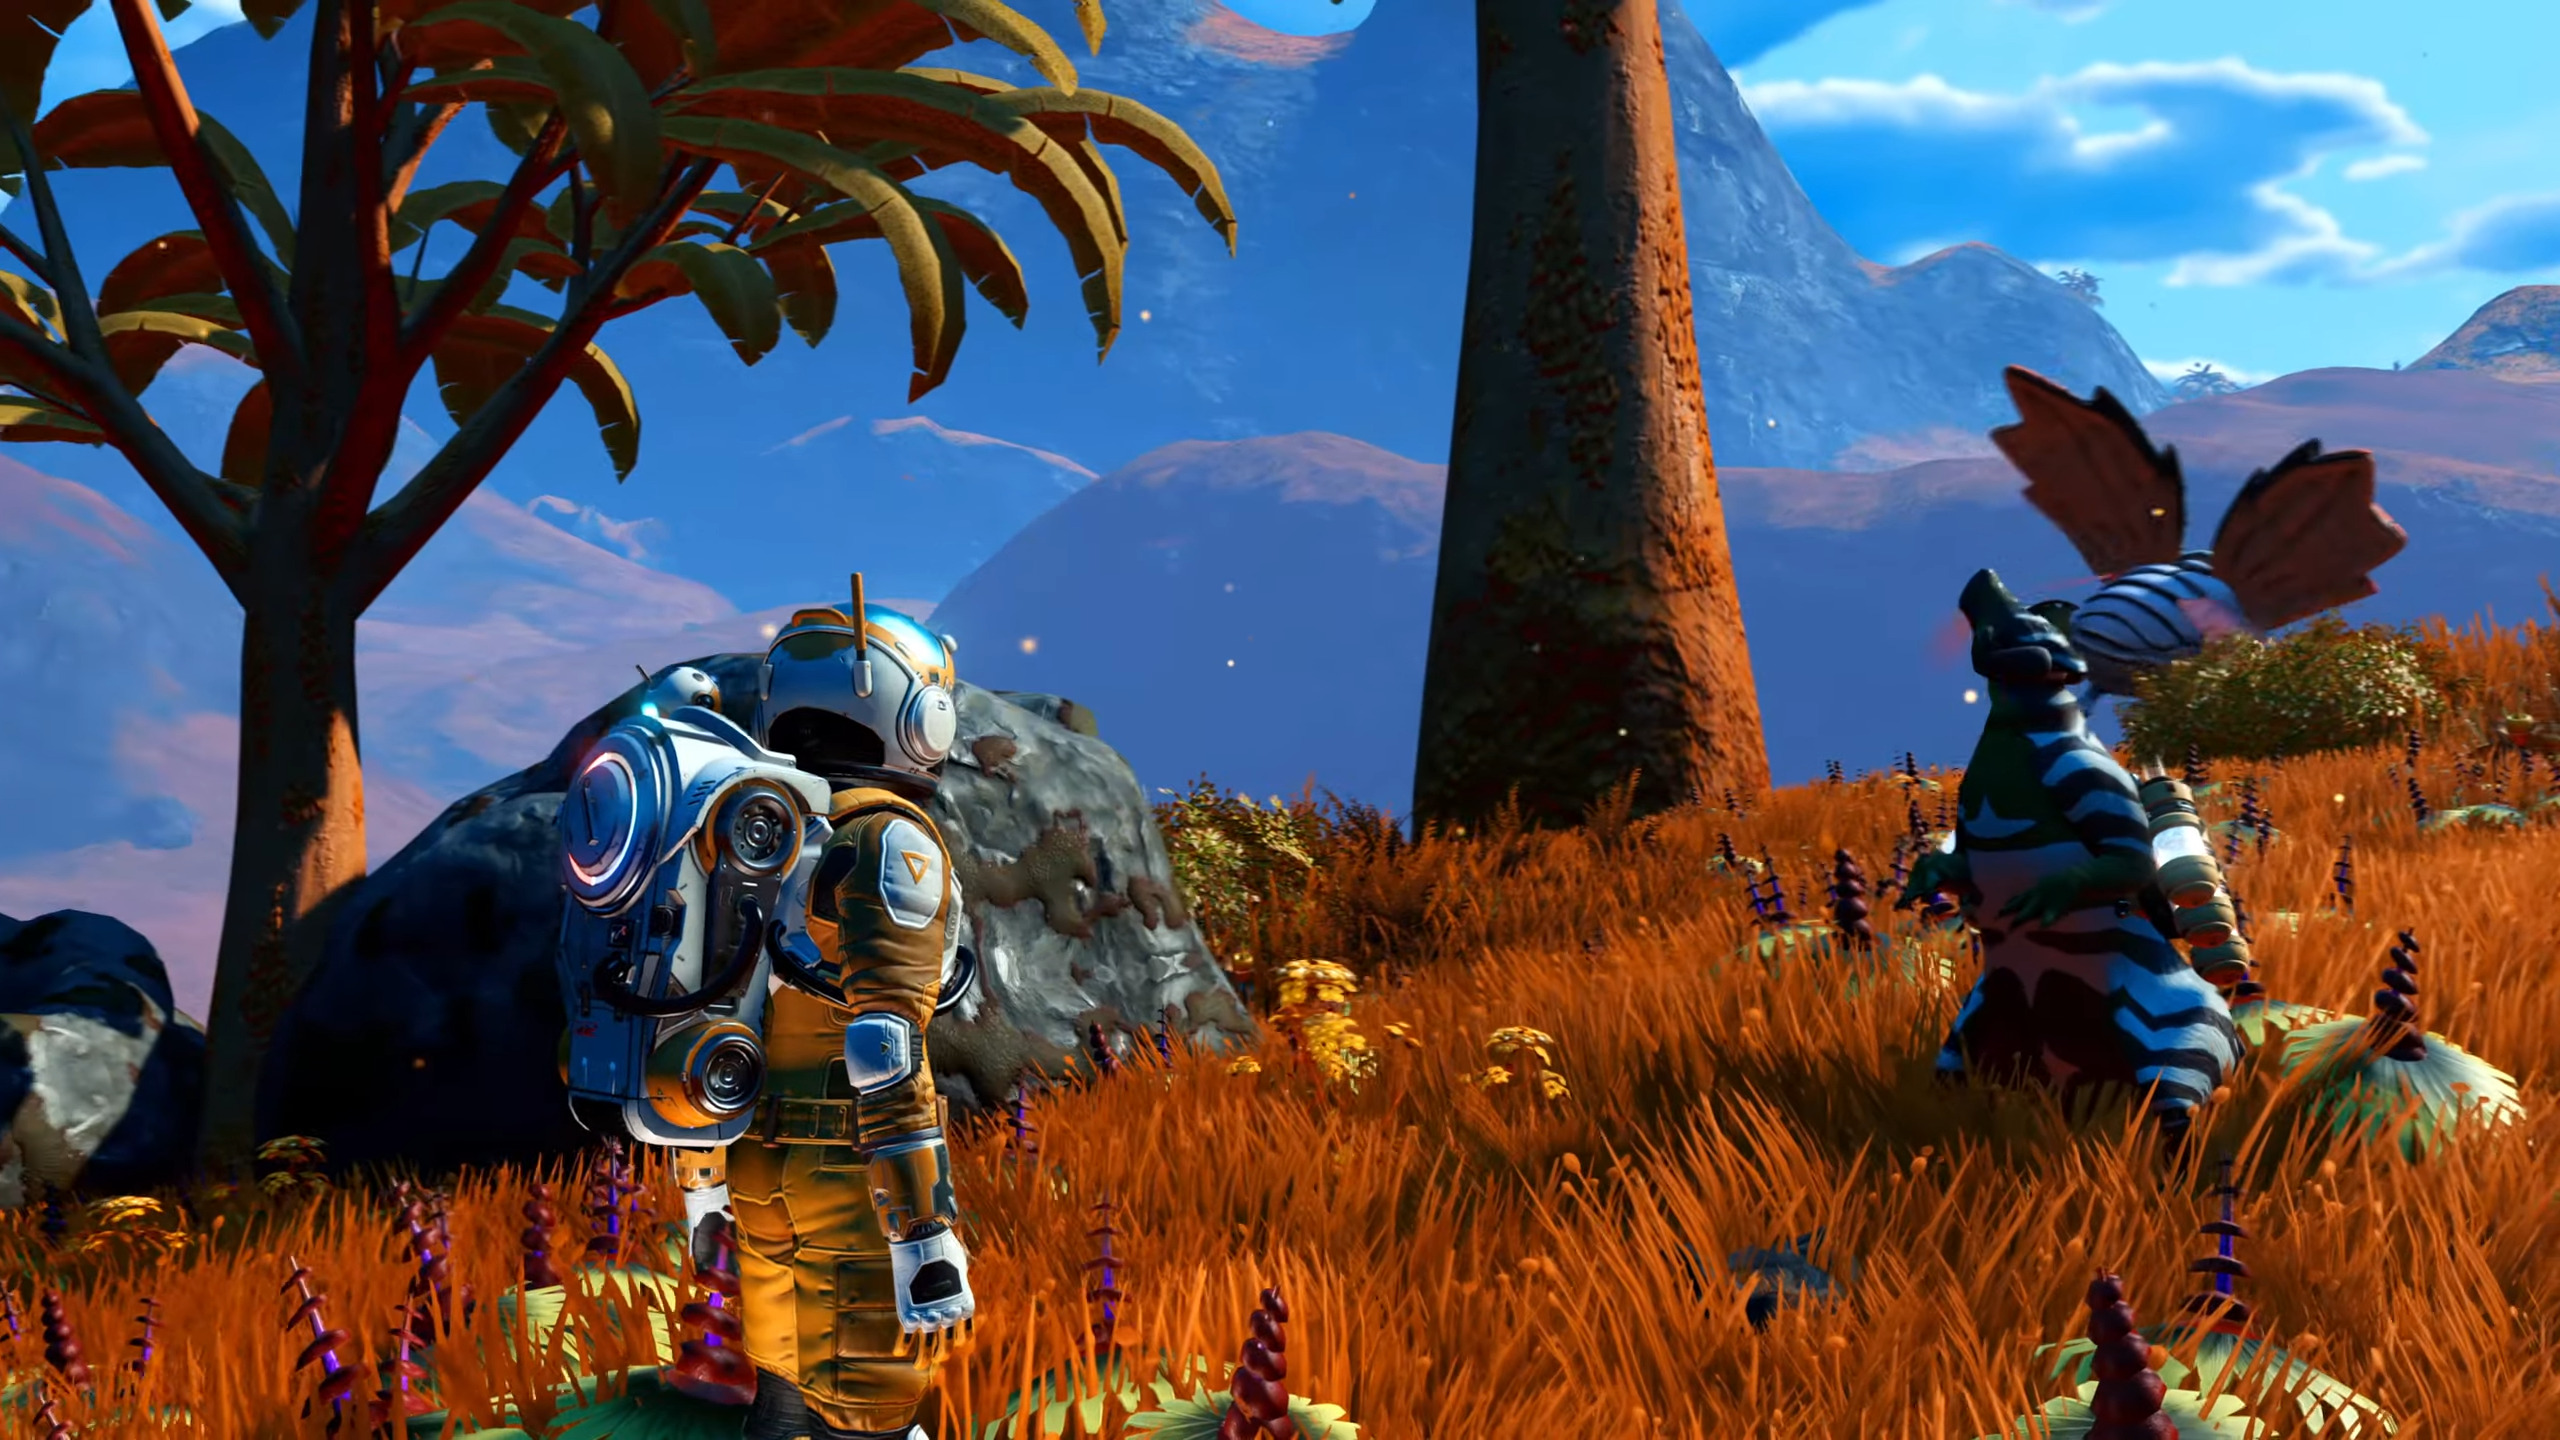 No Man’s Sky Pet Update Allows The Player To Tame Alien Creatures That Speak To You